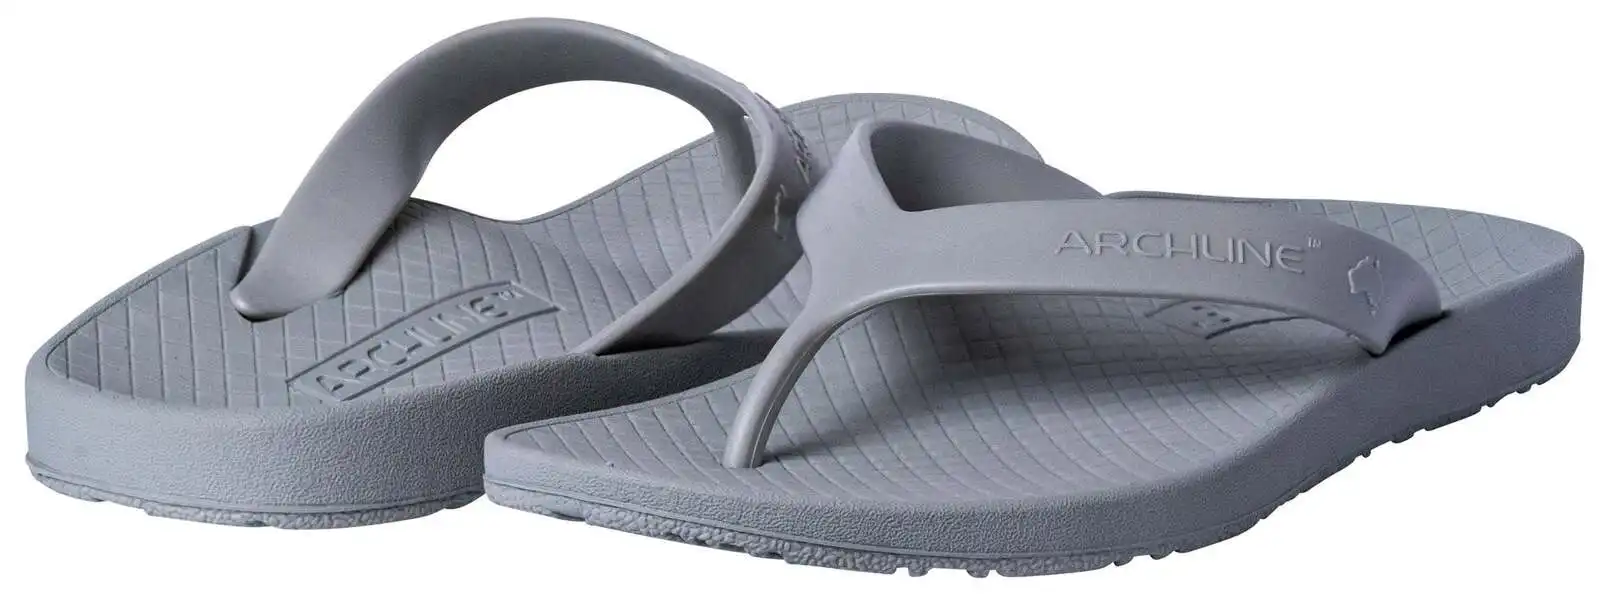 Archline Orthotic Flip Flops Thongs Arch Support Shoes Footwear - Grey